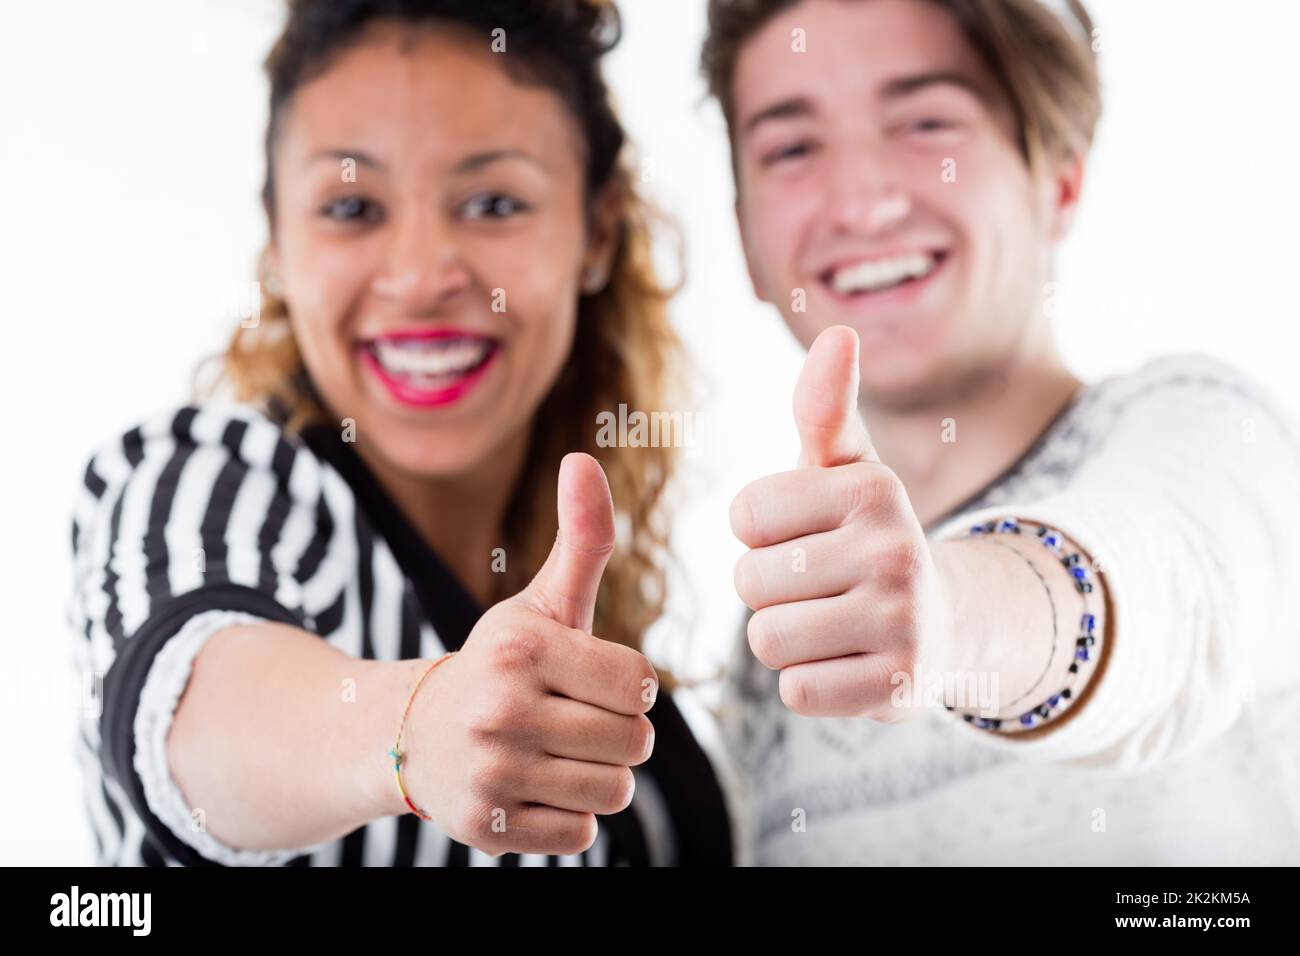 Two young cheerful people giving thumbs up Stock Photo